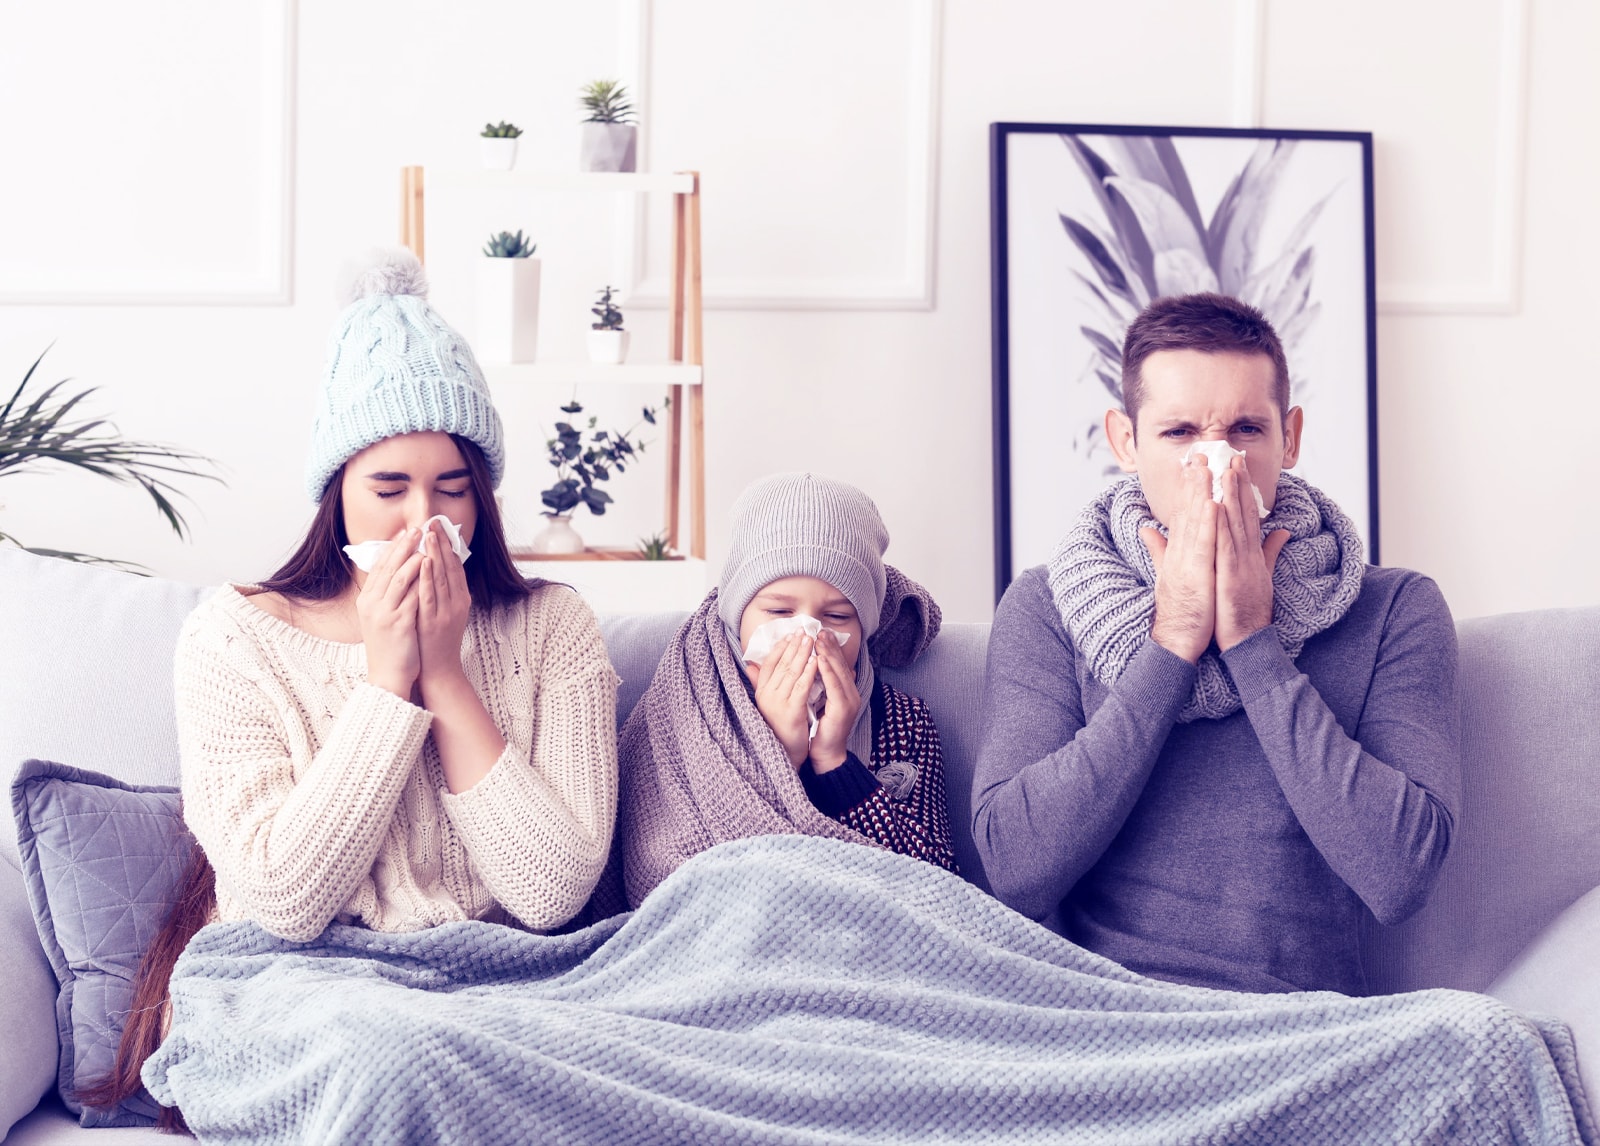 Genetic ancestry can explain population-level differences in immune response to the flu virus